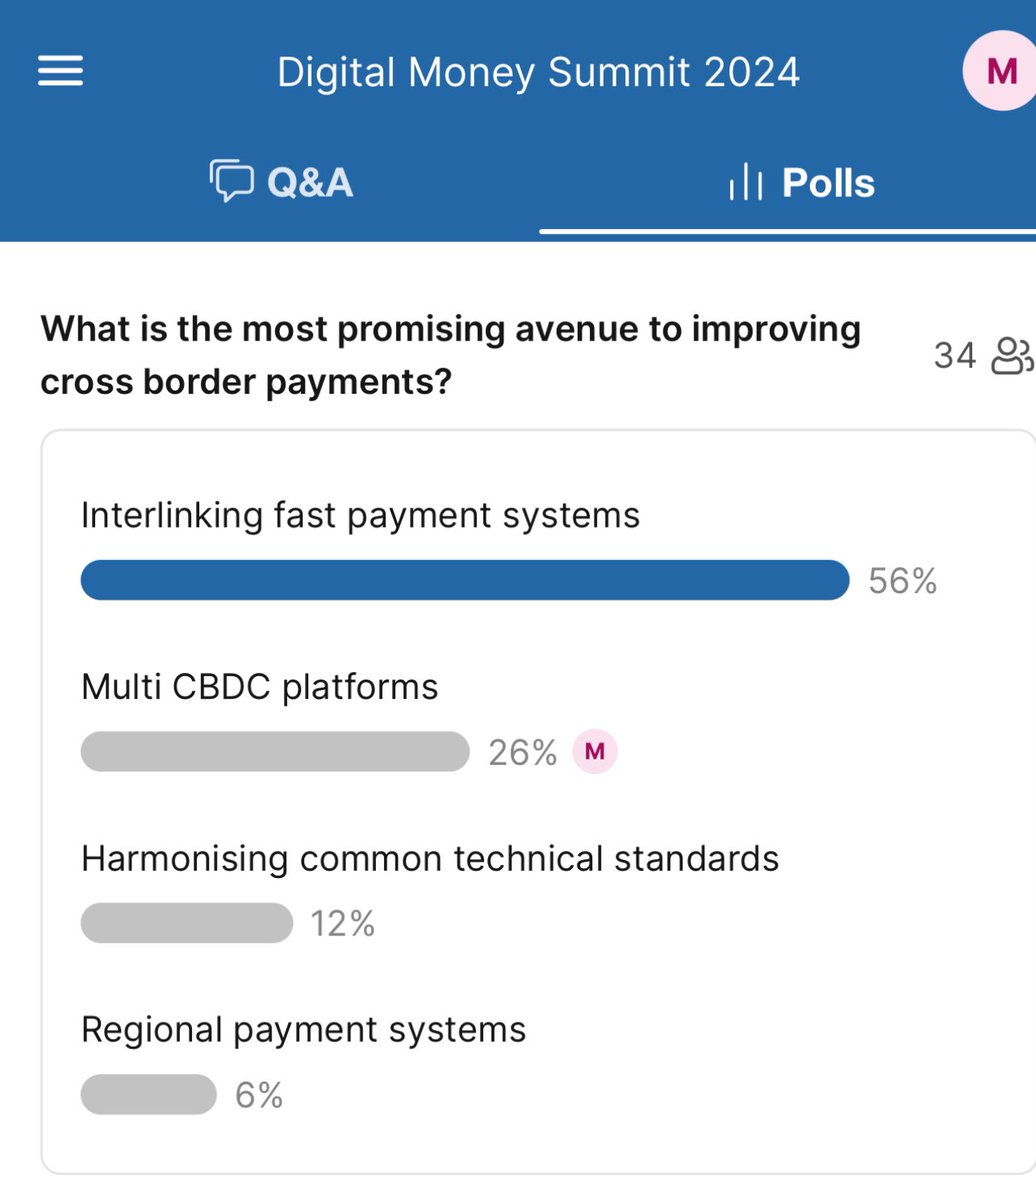 Poll of the audience @OMFIFDMI now. What is the most promising avenue to improving cross border payments? The audience votes for interlinking fast #payments.